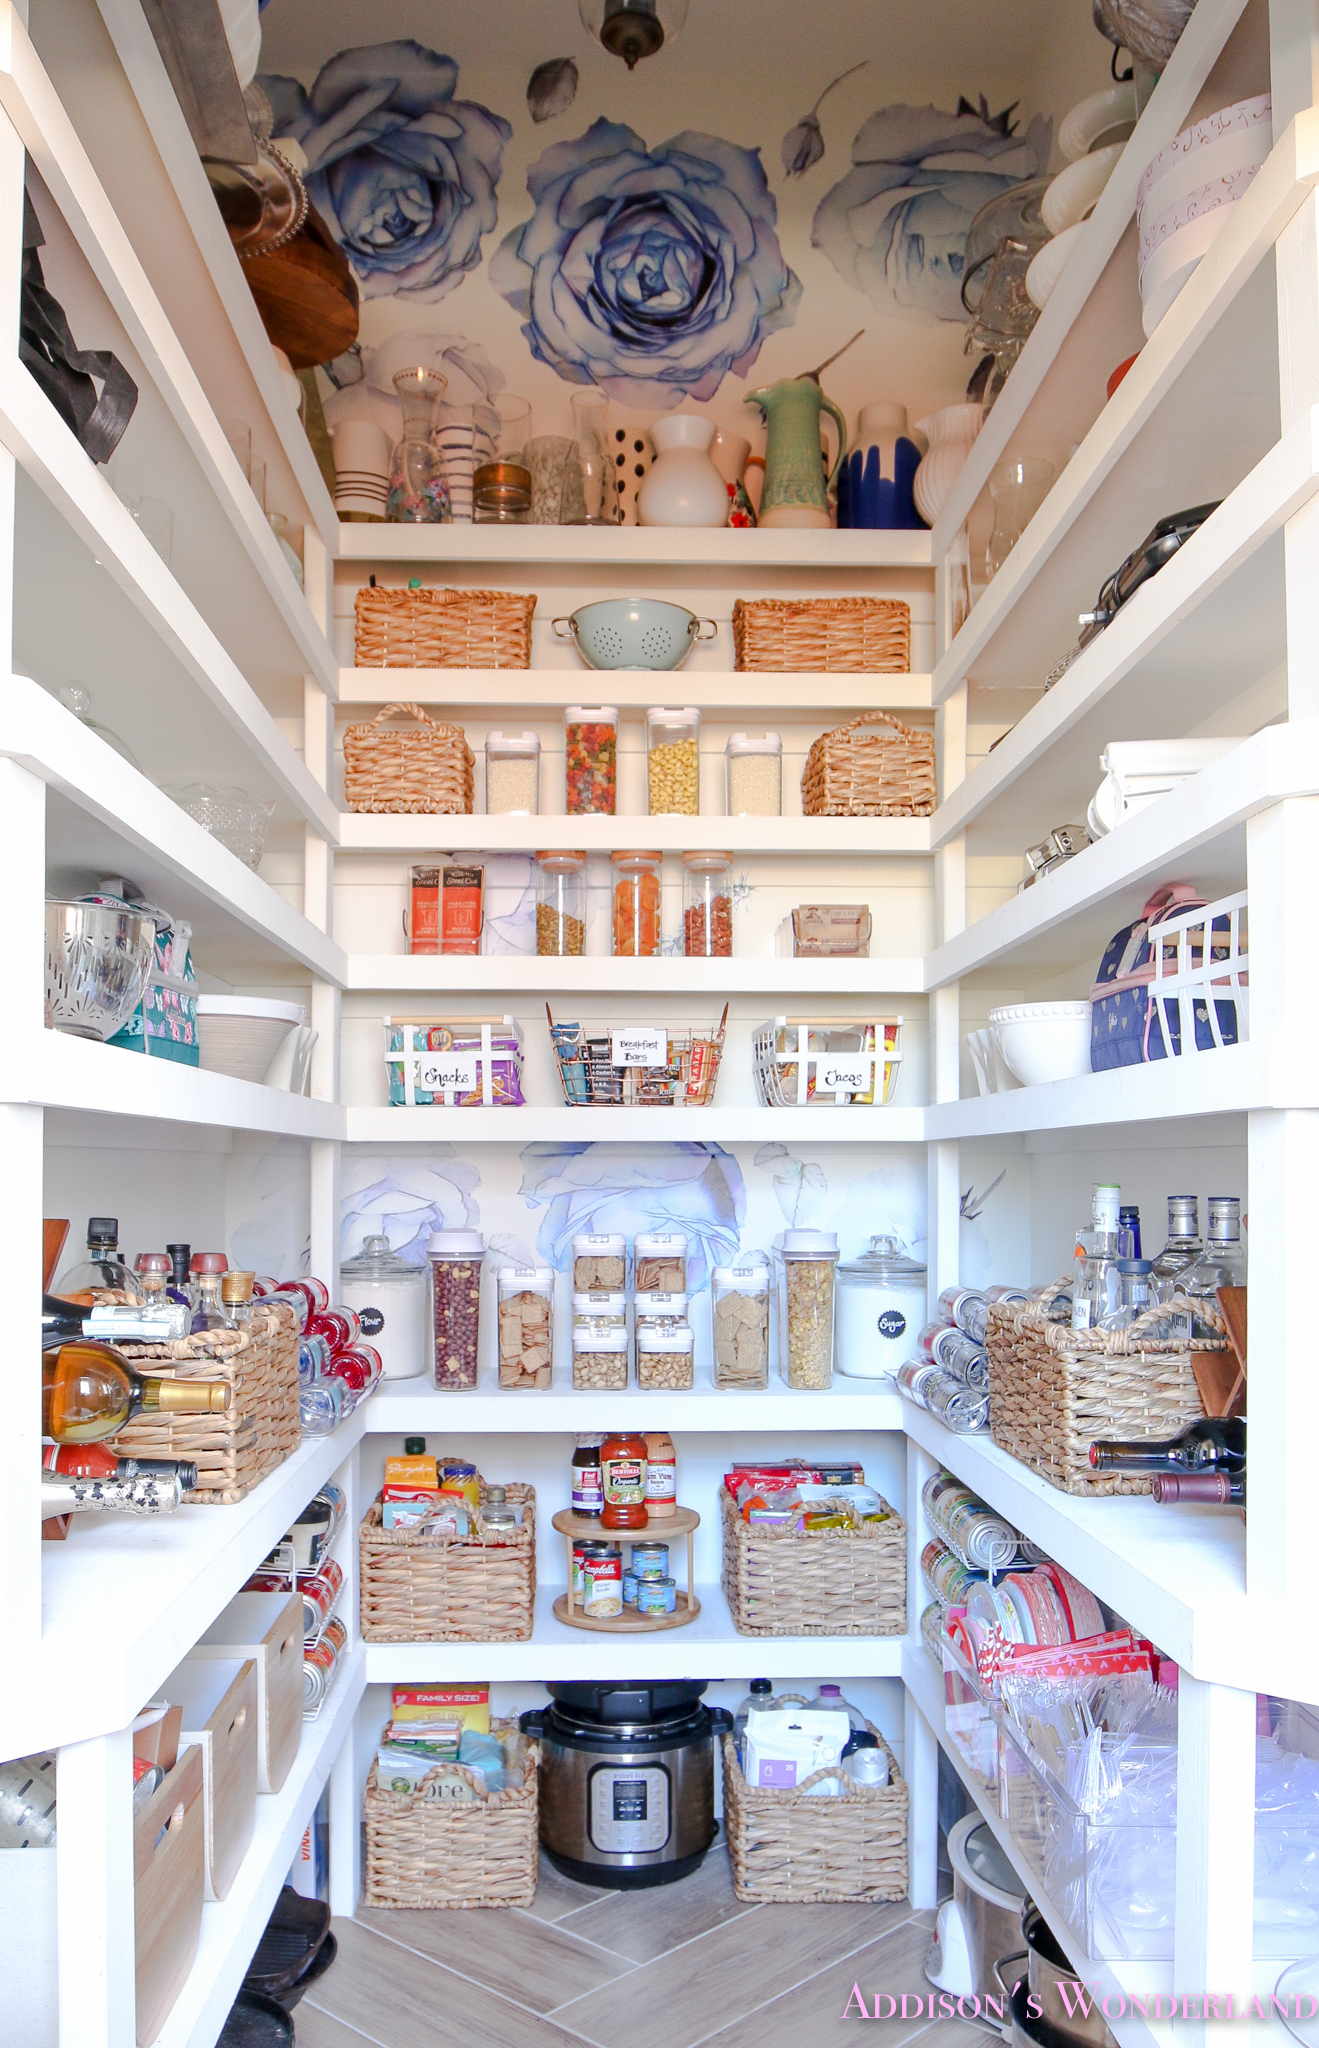 Pantry Organization Ideas from Our Colorful New Pantry!